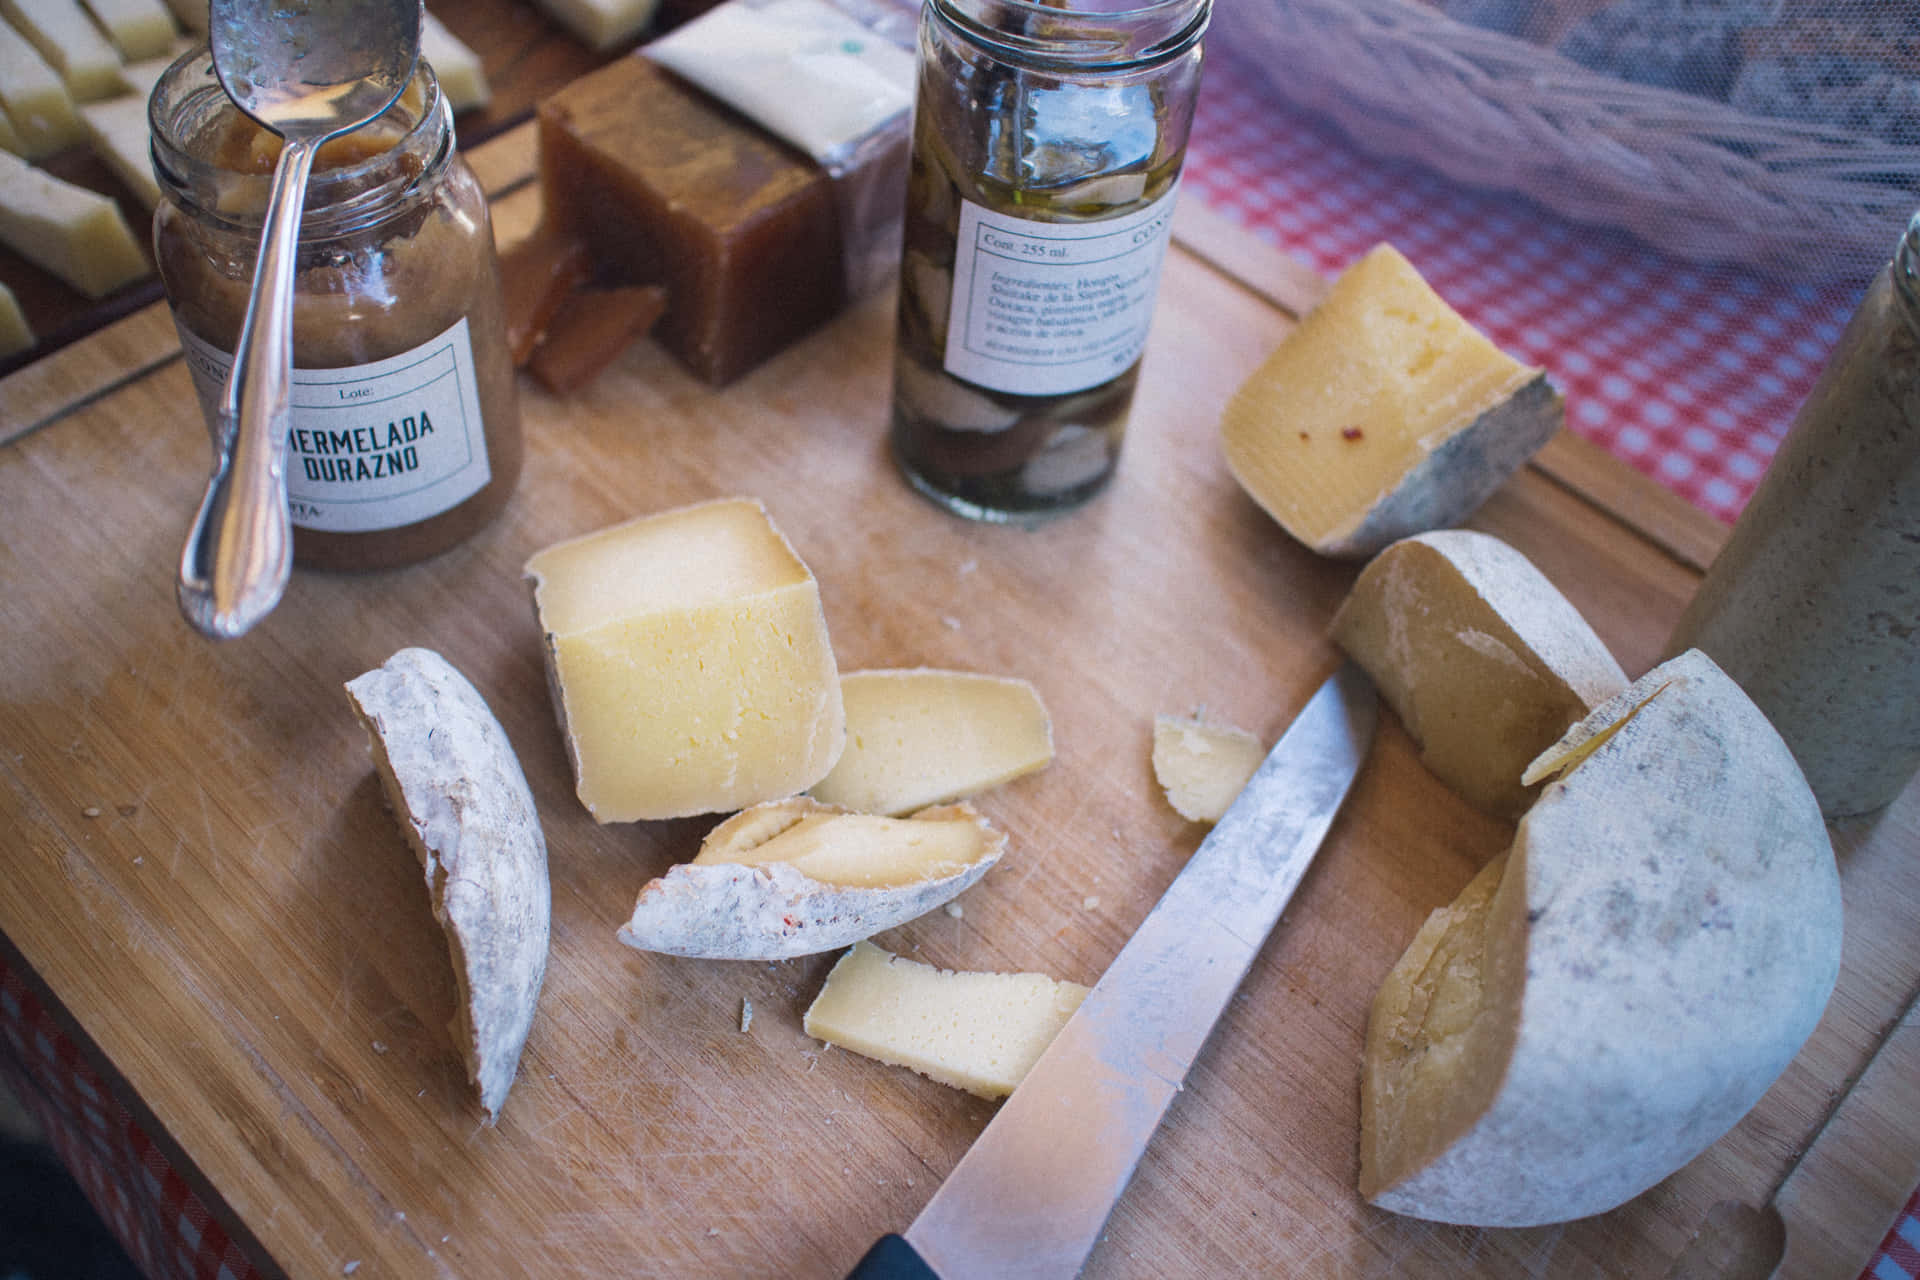 A vibrant display of various types of cheese on a wooden cutting board